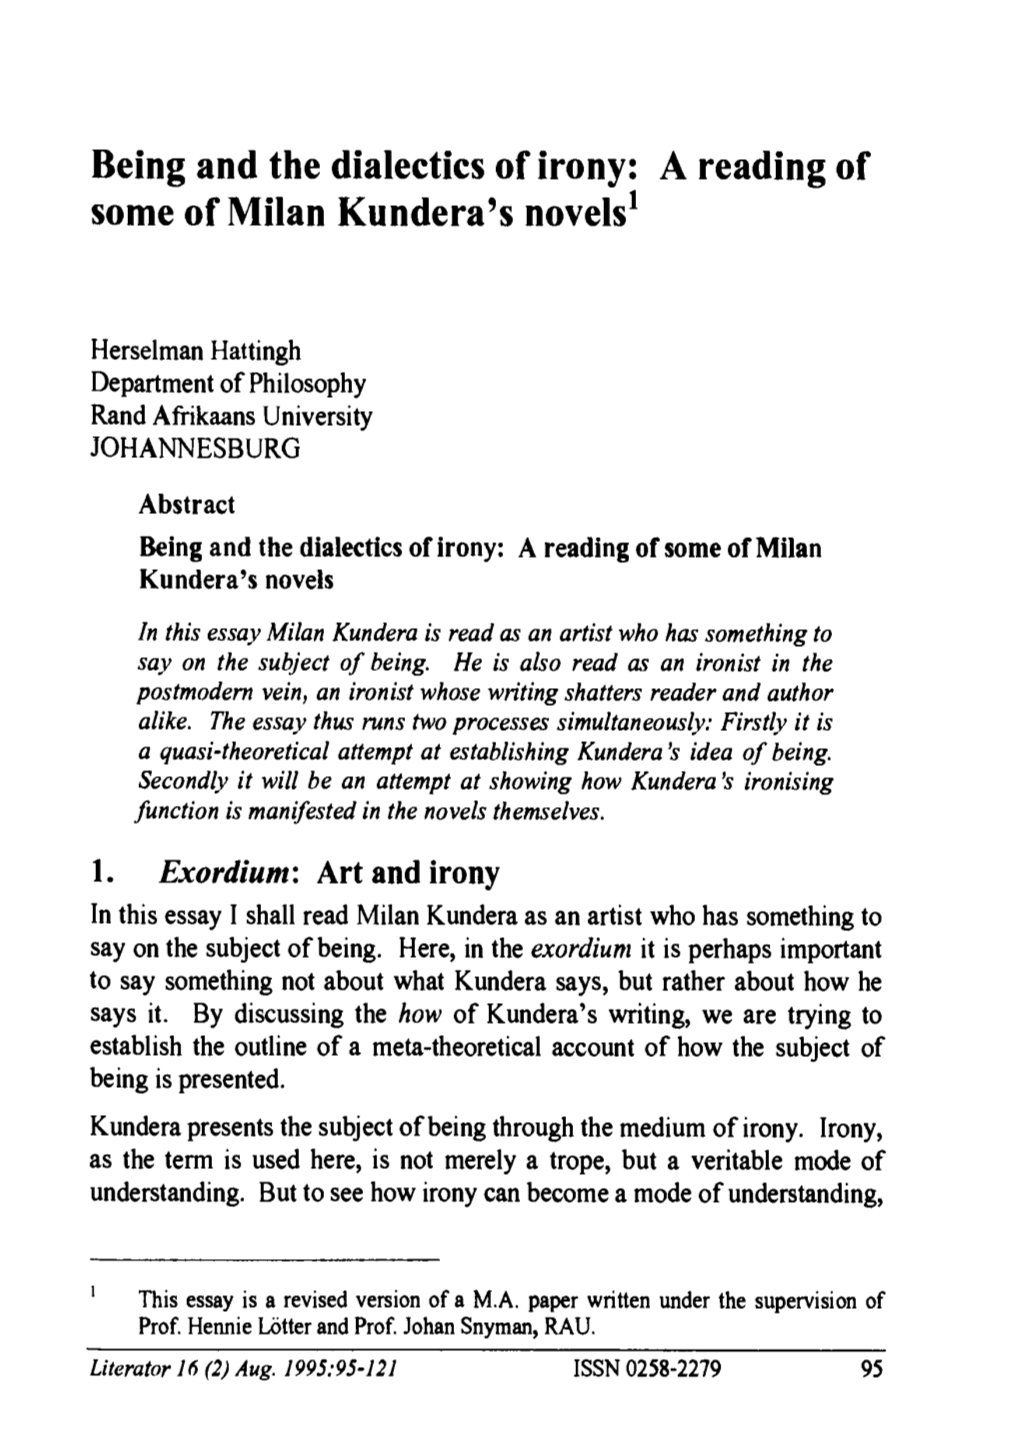 Being and the Dialectics of Irony: a Reading of Some of Milan Kundera's